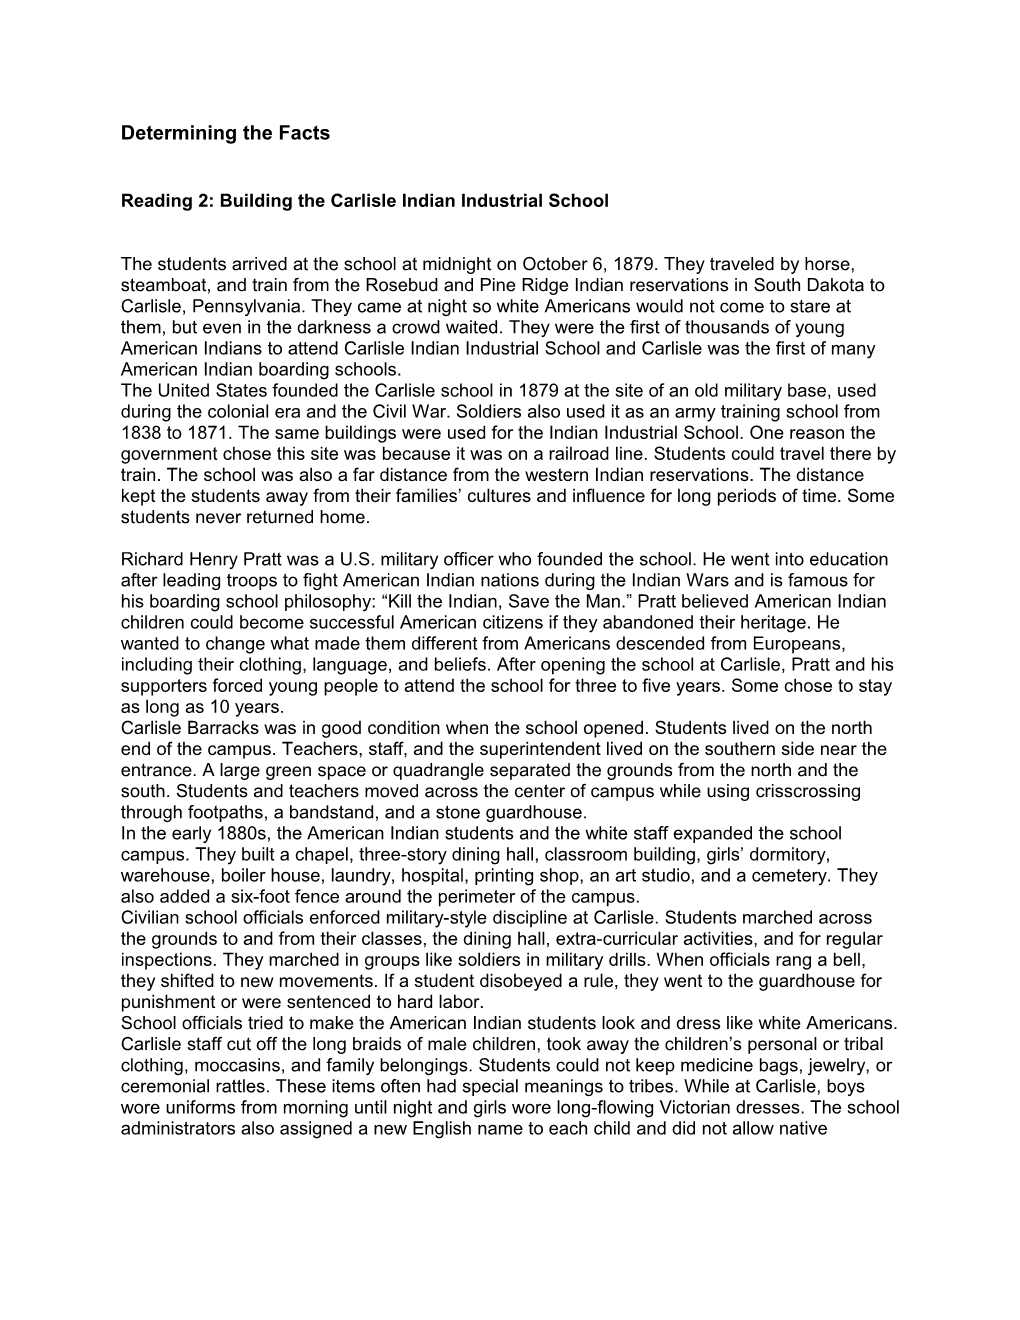 Reading 2: Determng the Facts: Building the Carlisle School. New Mexico History 2016-2017